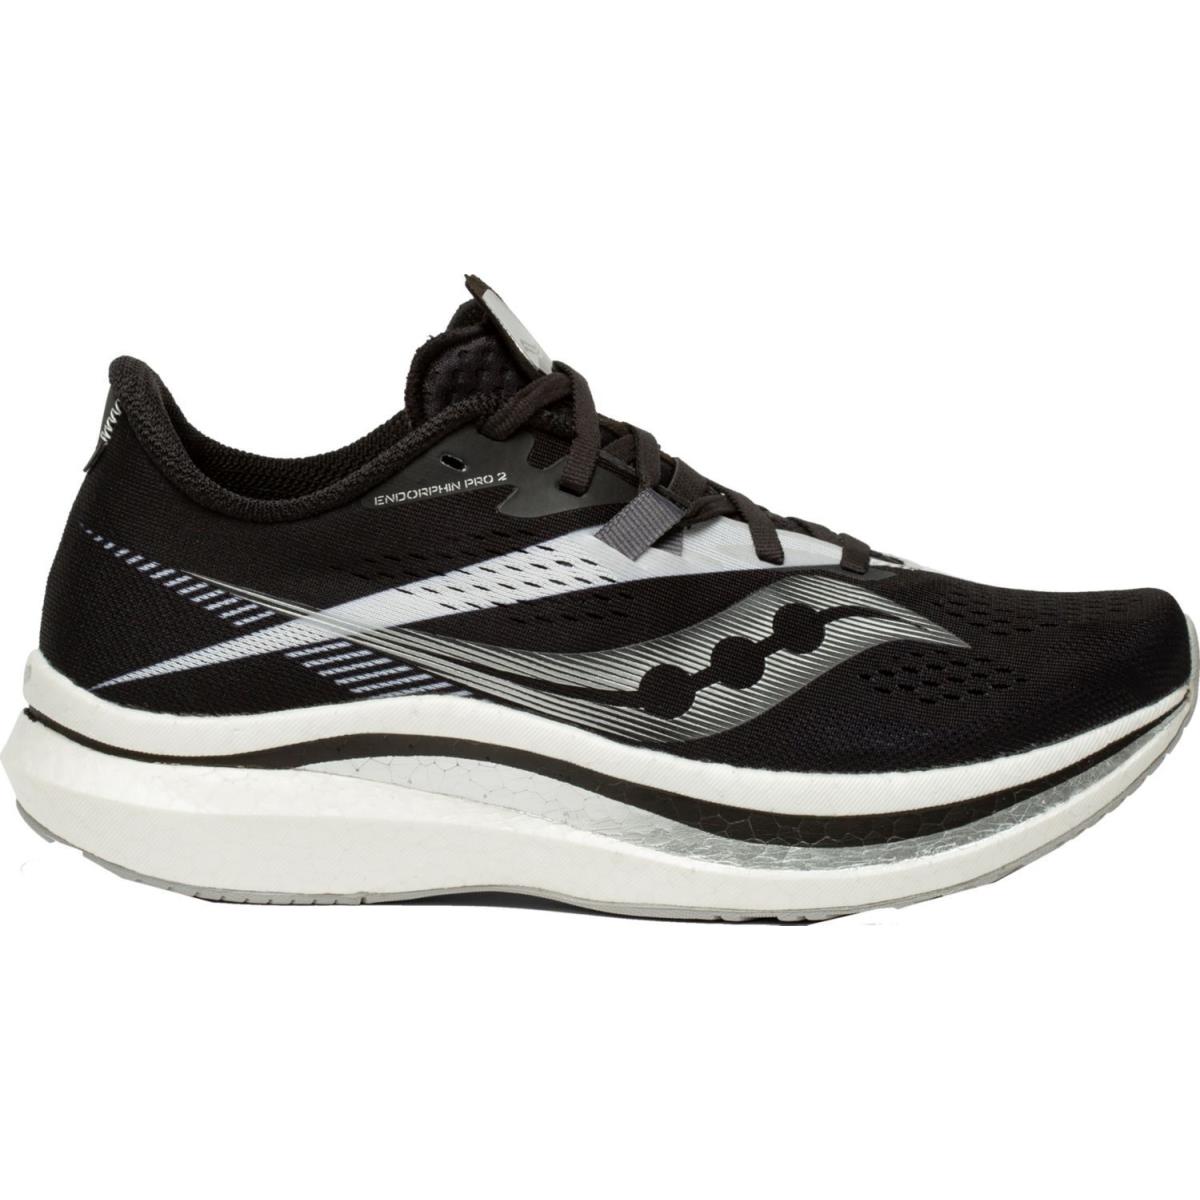 Womens Saucony Endorphin Pro 2 Running Shoes Black White Grey Silver S10687 10